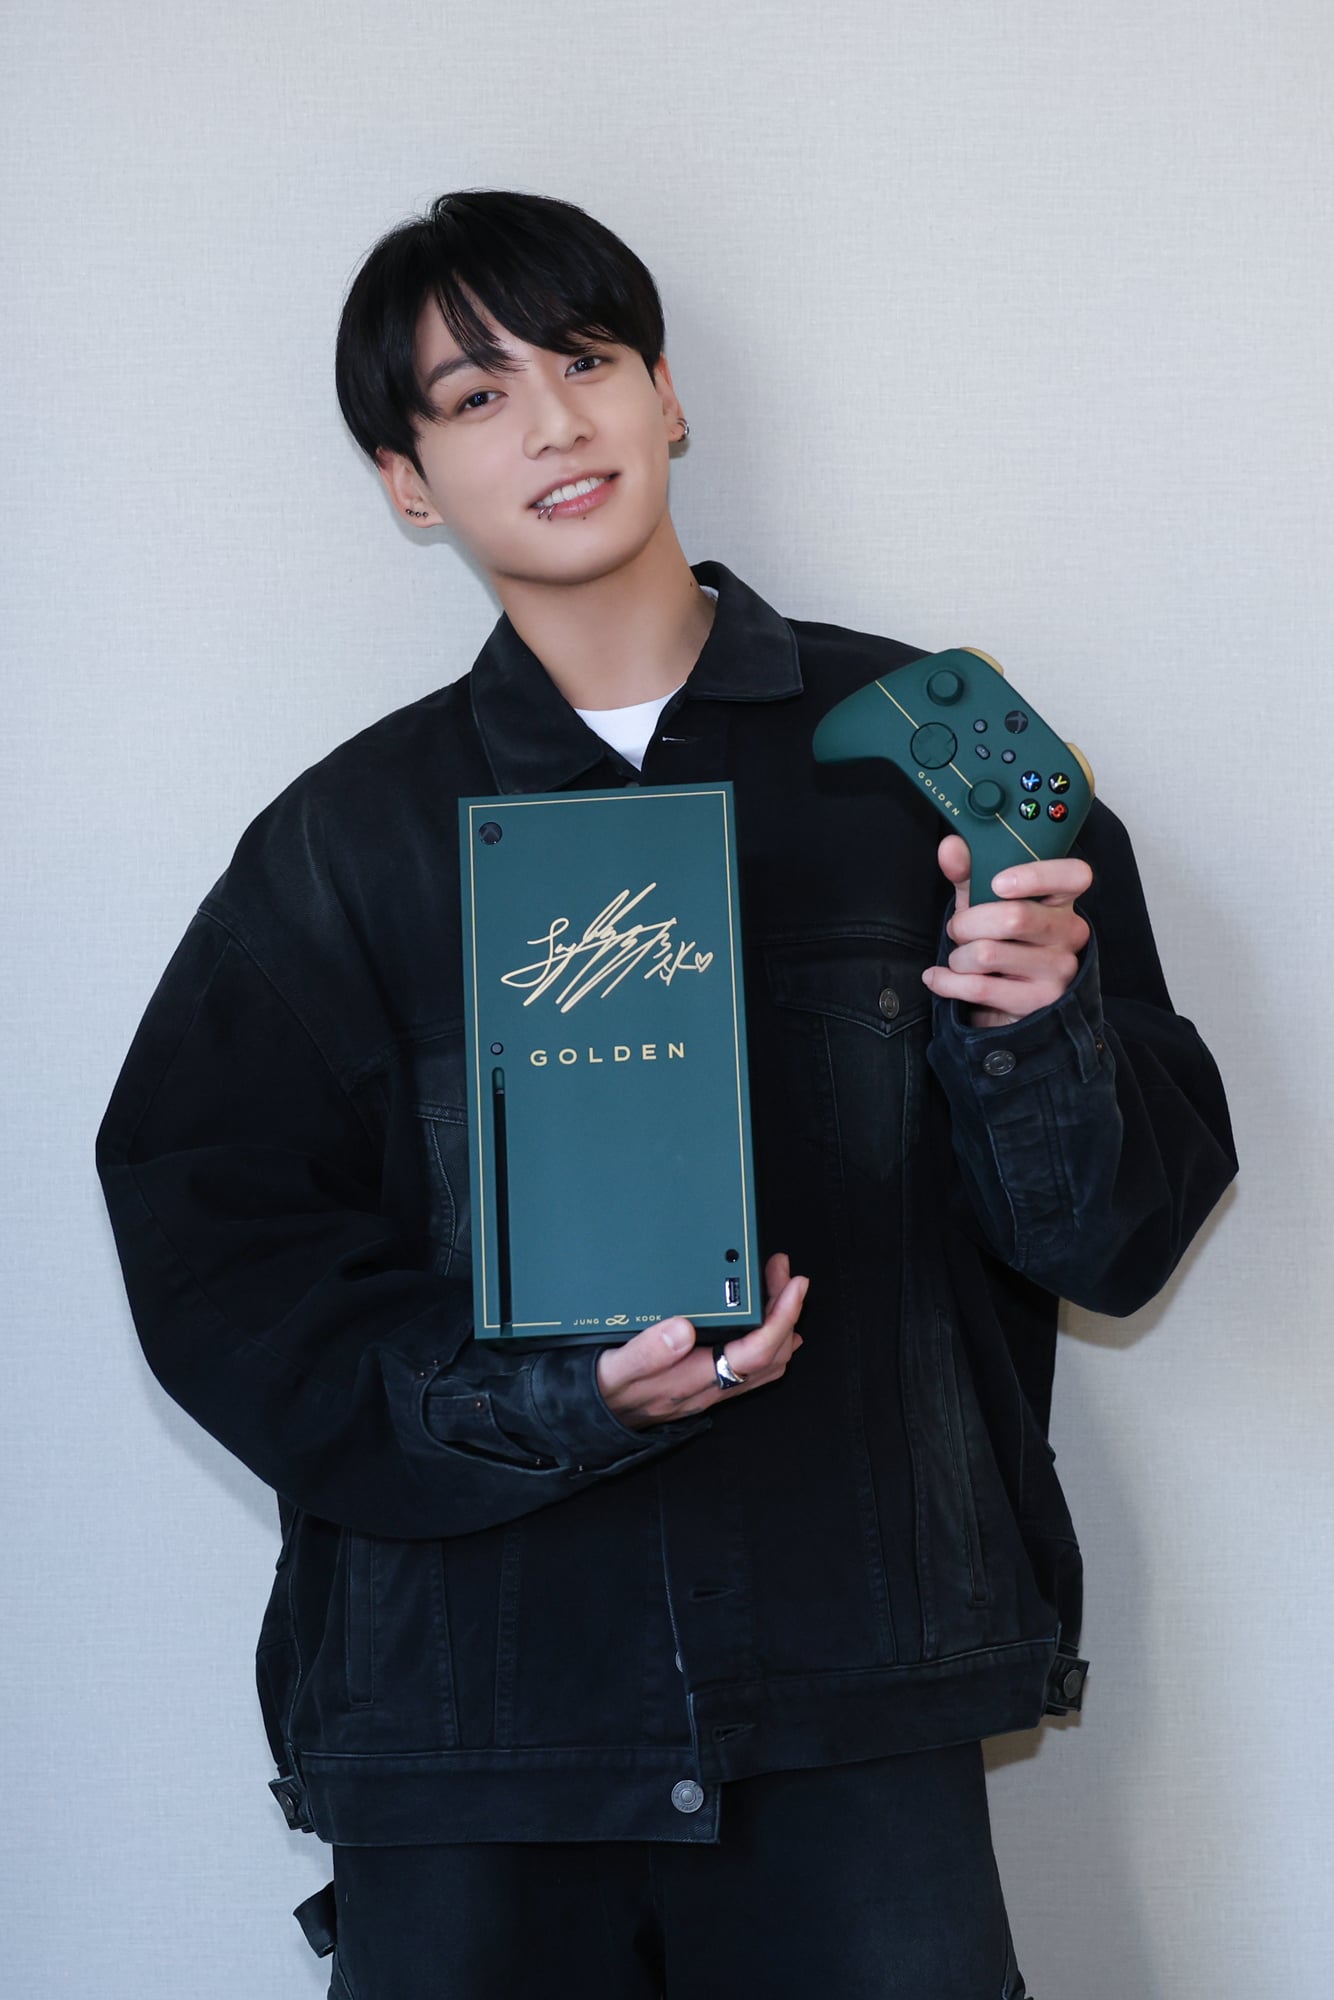 [BTS_official] Jungkook shows off his new Xbox ahead of his Times Square performance - 101123